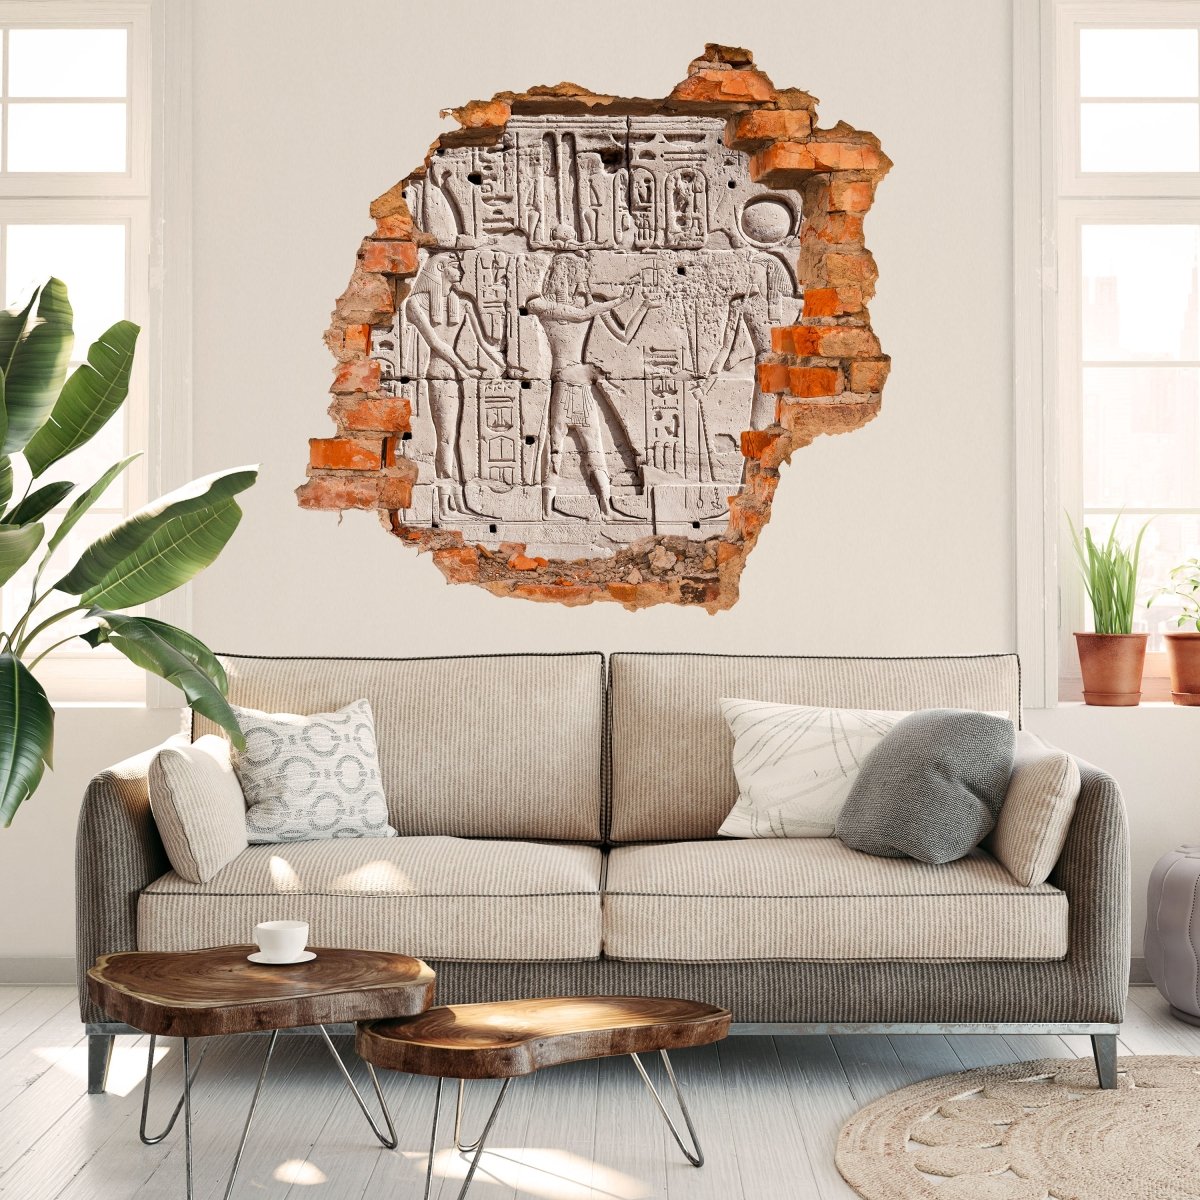 3D wall sticker carvings of hieroglyphs on the wall - Wall Decal M0817